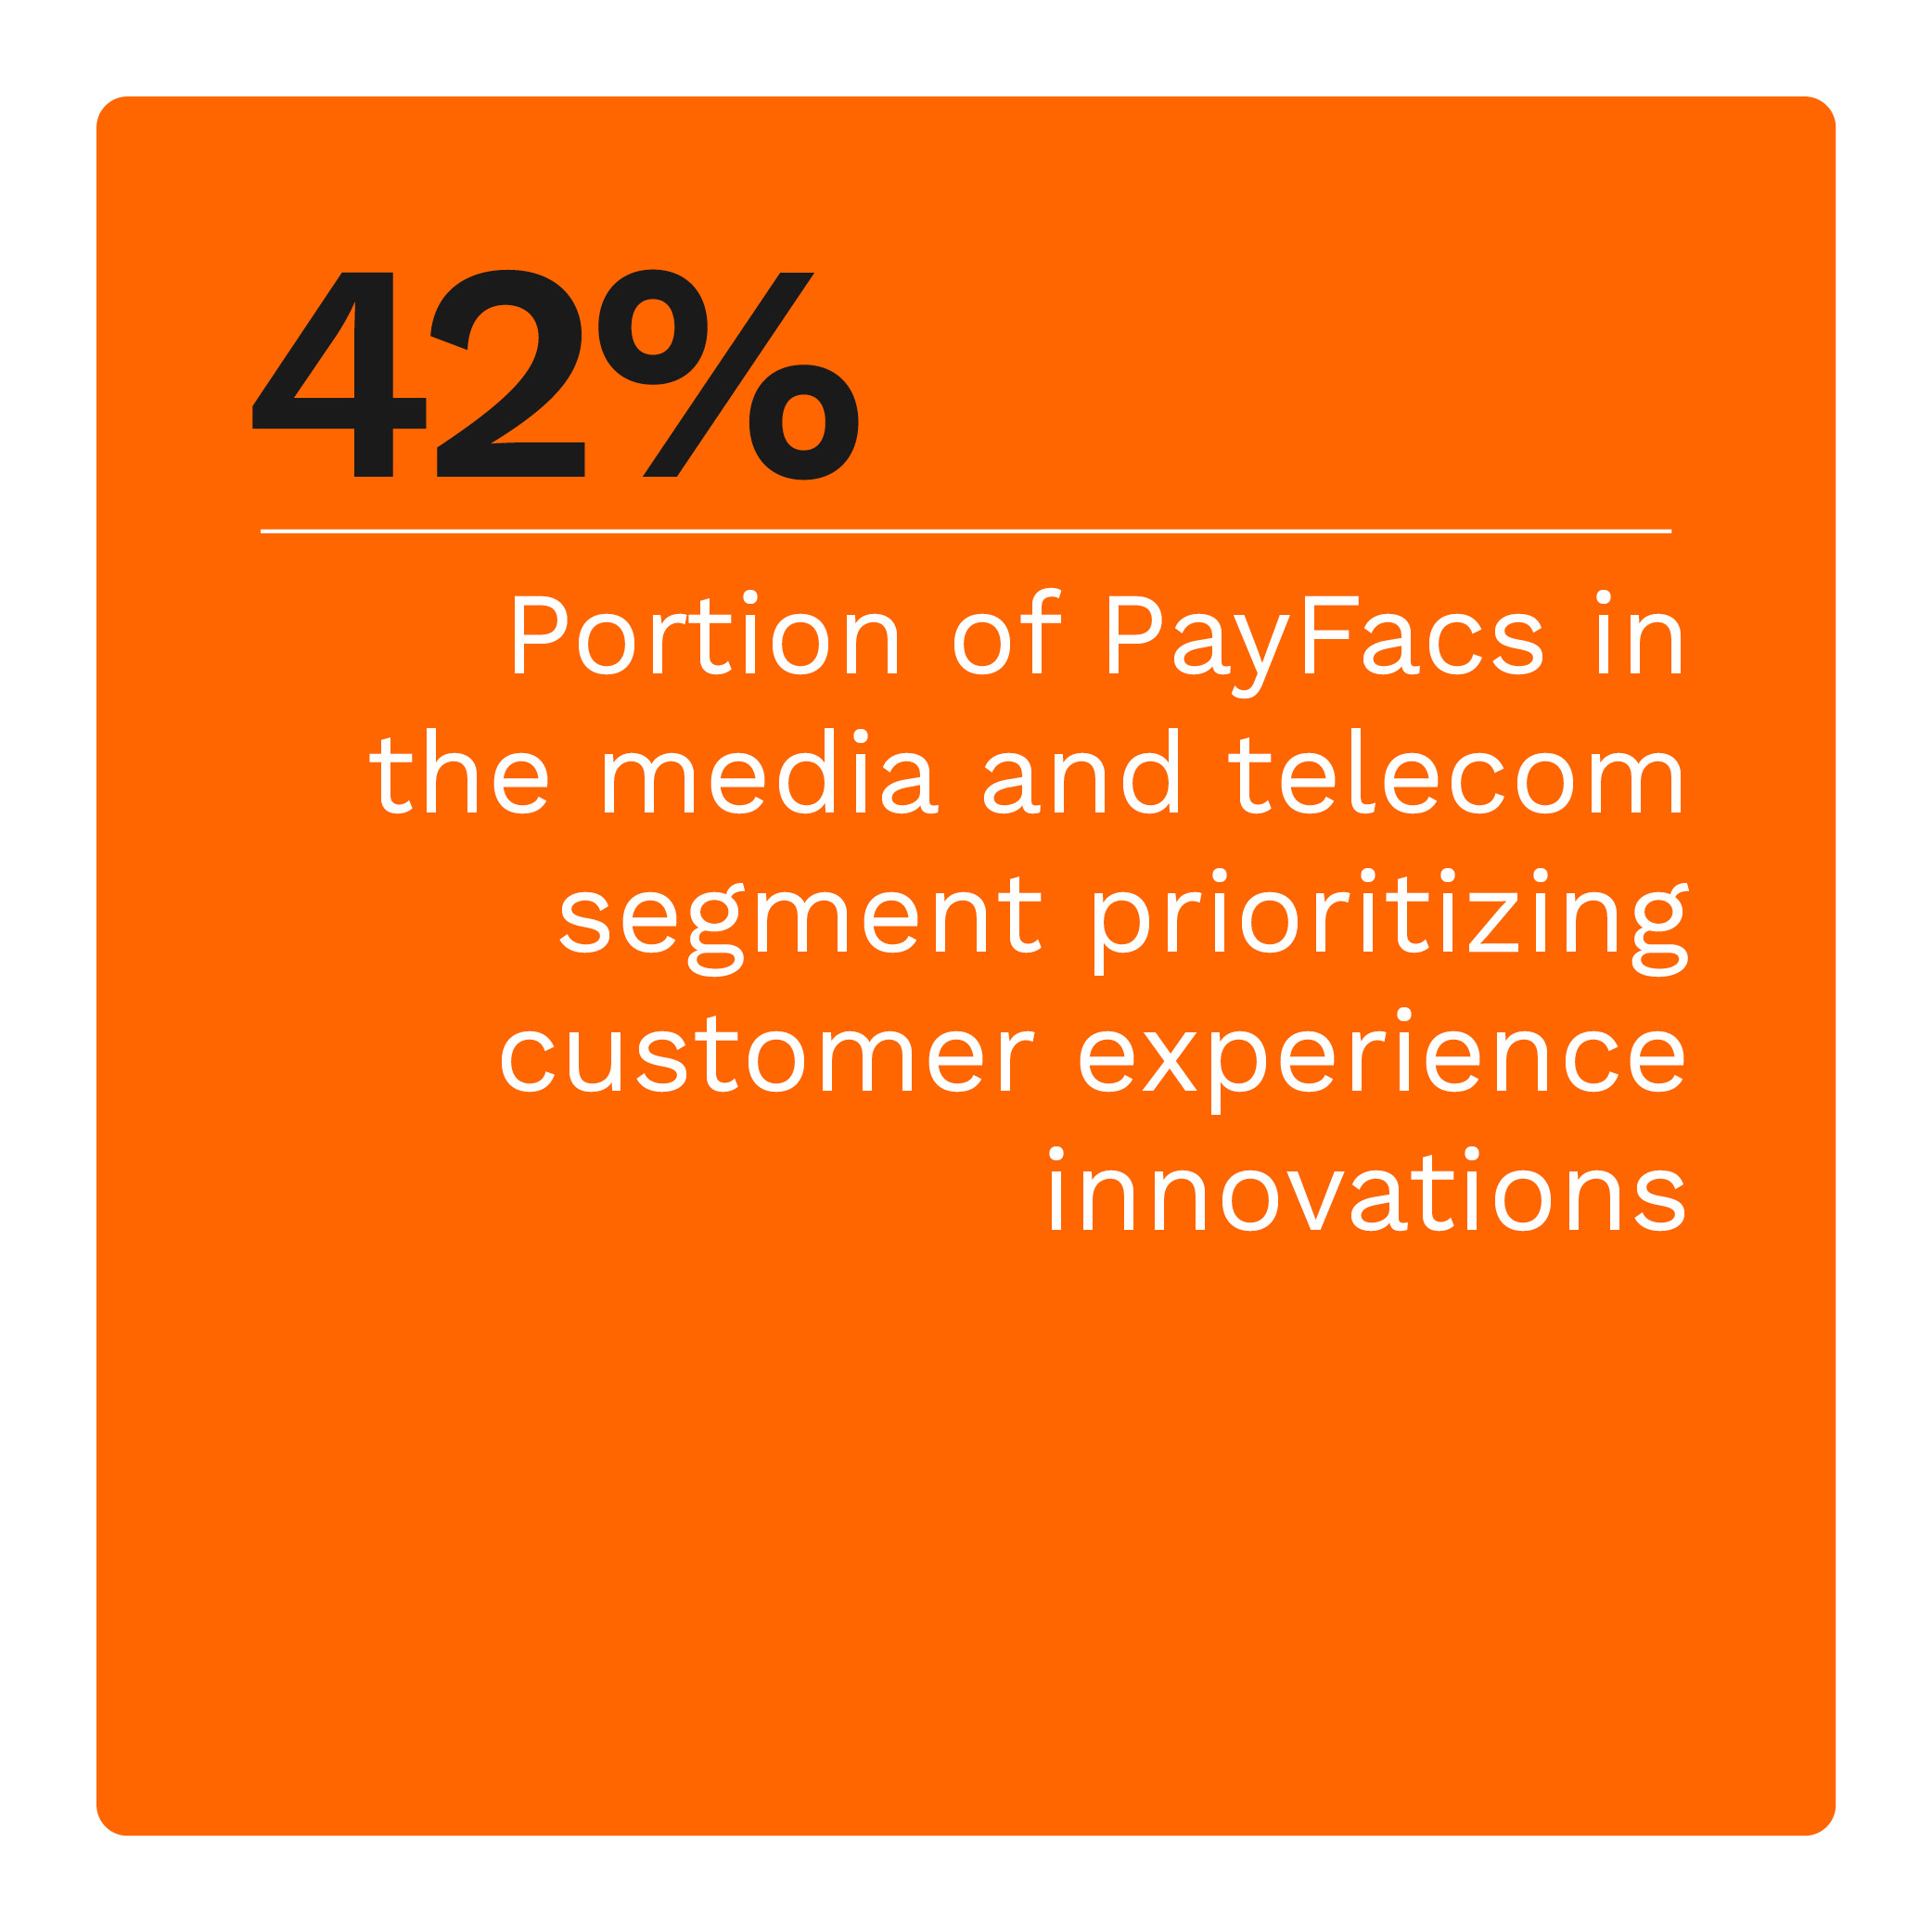  Portion of PayFacs in the media and telecom segment prioritizing customer experience innovations